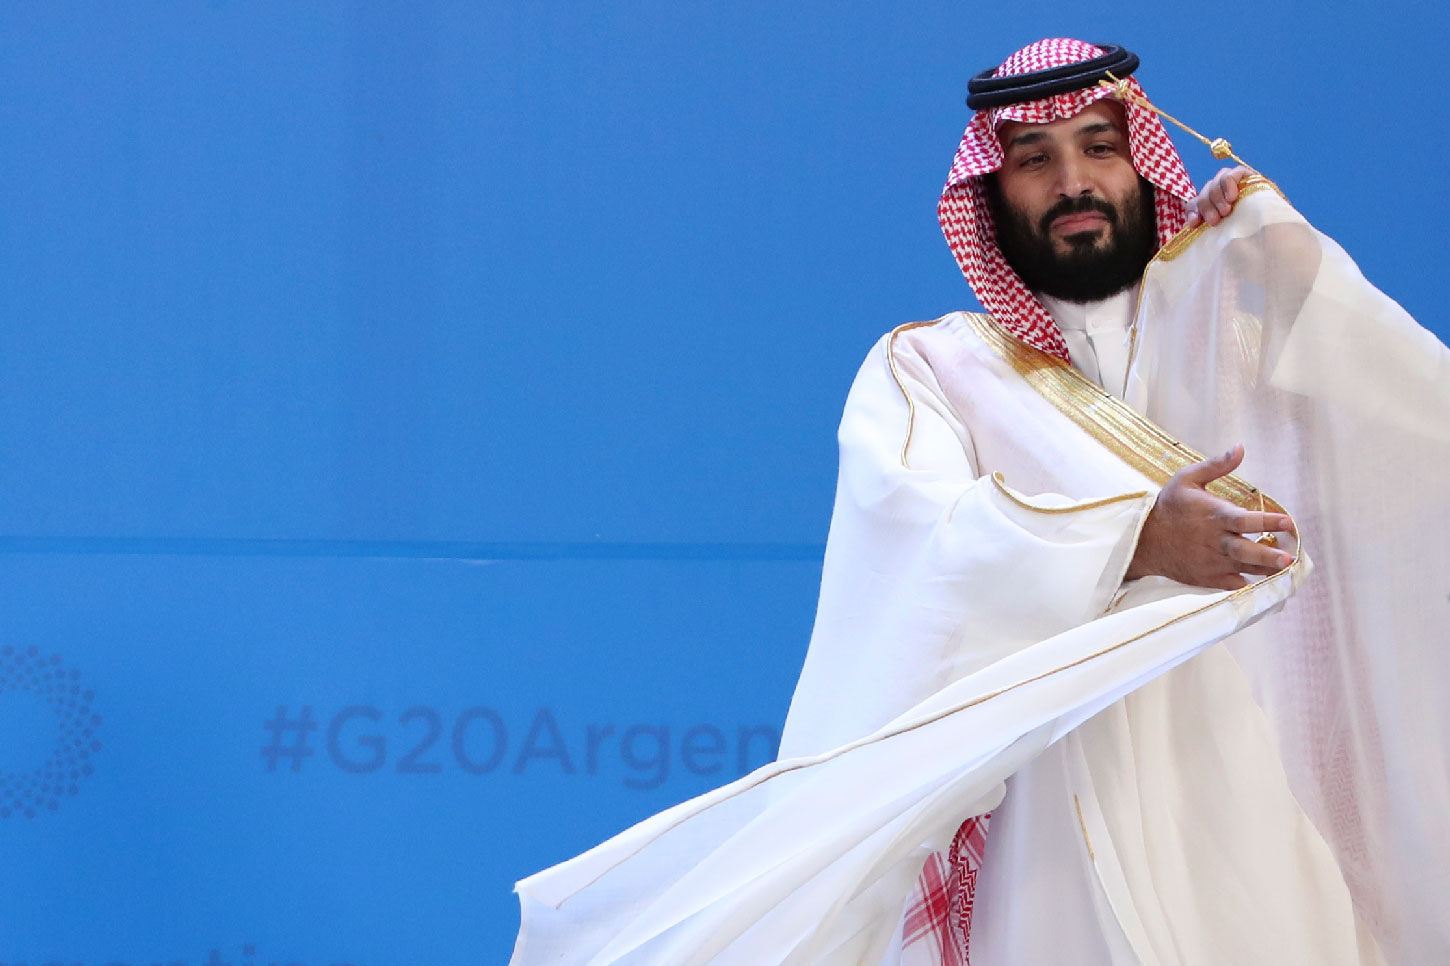 Saudi Arabia's Crown Prince Mohammed bin Salman adjusts his robe as leaders gather for the group at the G20 Leader's Summit at the Costa Salguero Center in Buenos Aires, Argentina, Friday, Nov. 30, 2018.